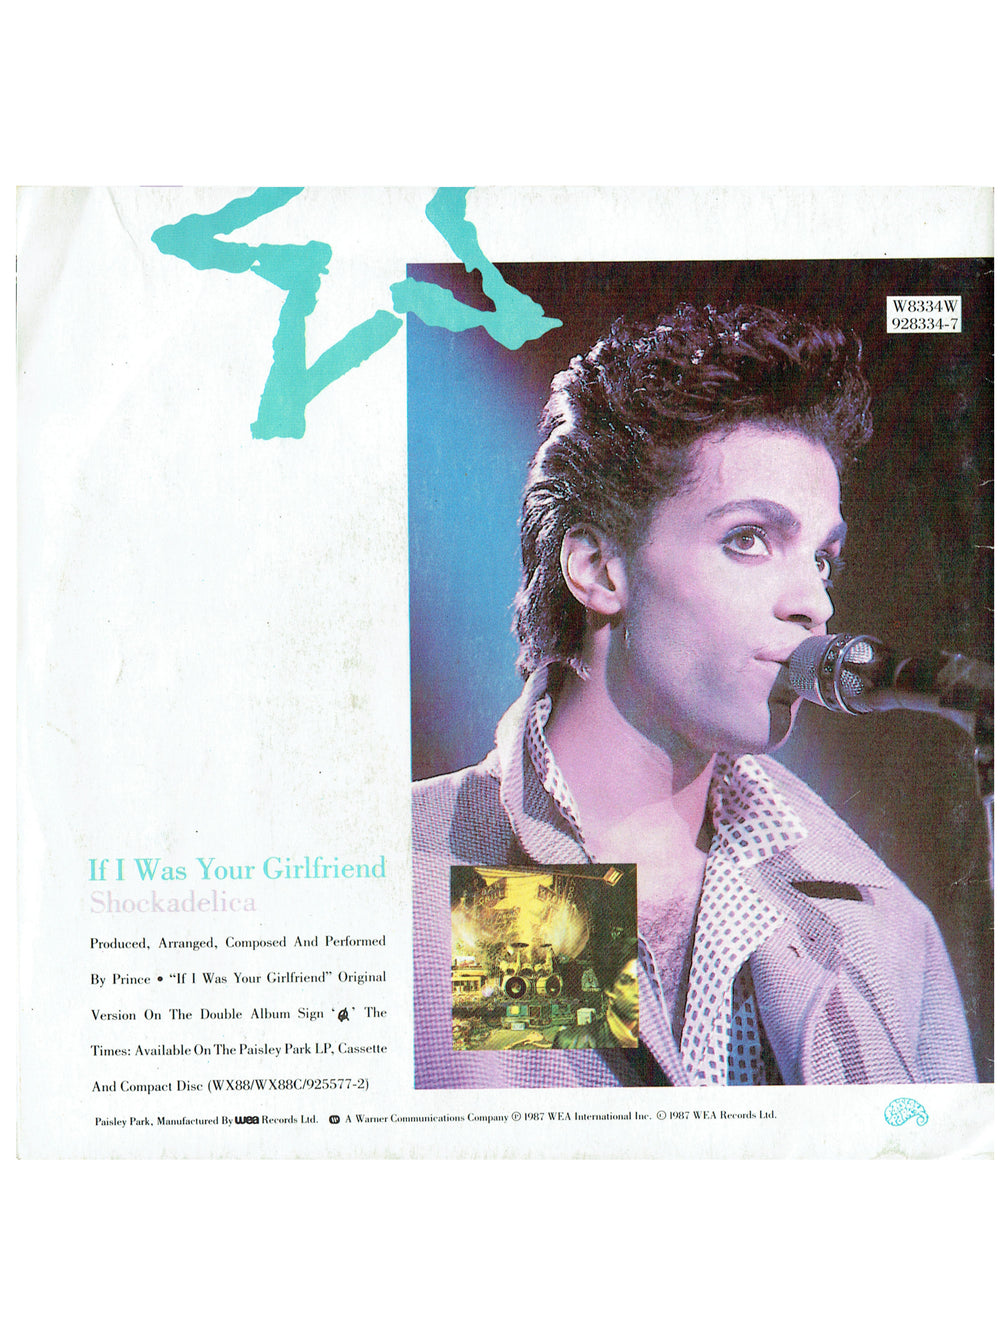 Prince – If I Was Your Girlfriend Vinyl 7" Single Limited Edition Poster Bag UK Preloved: 1987